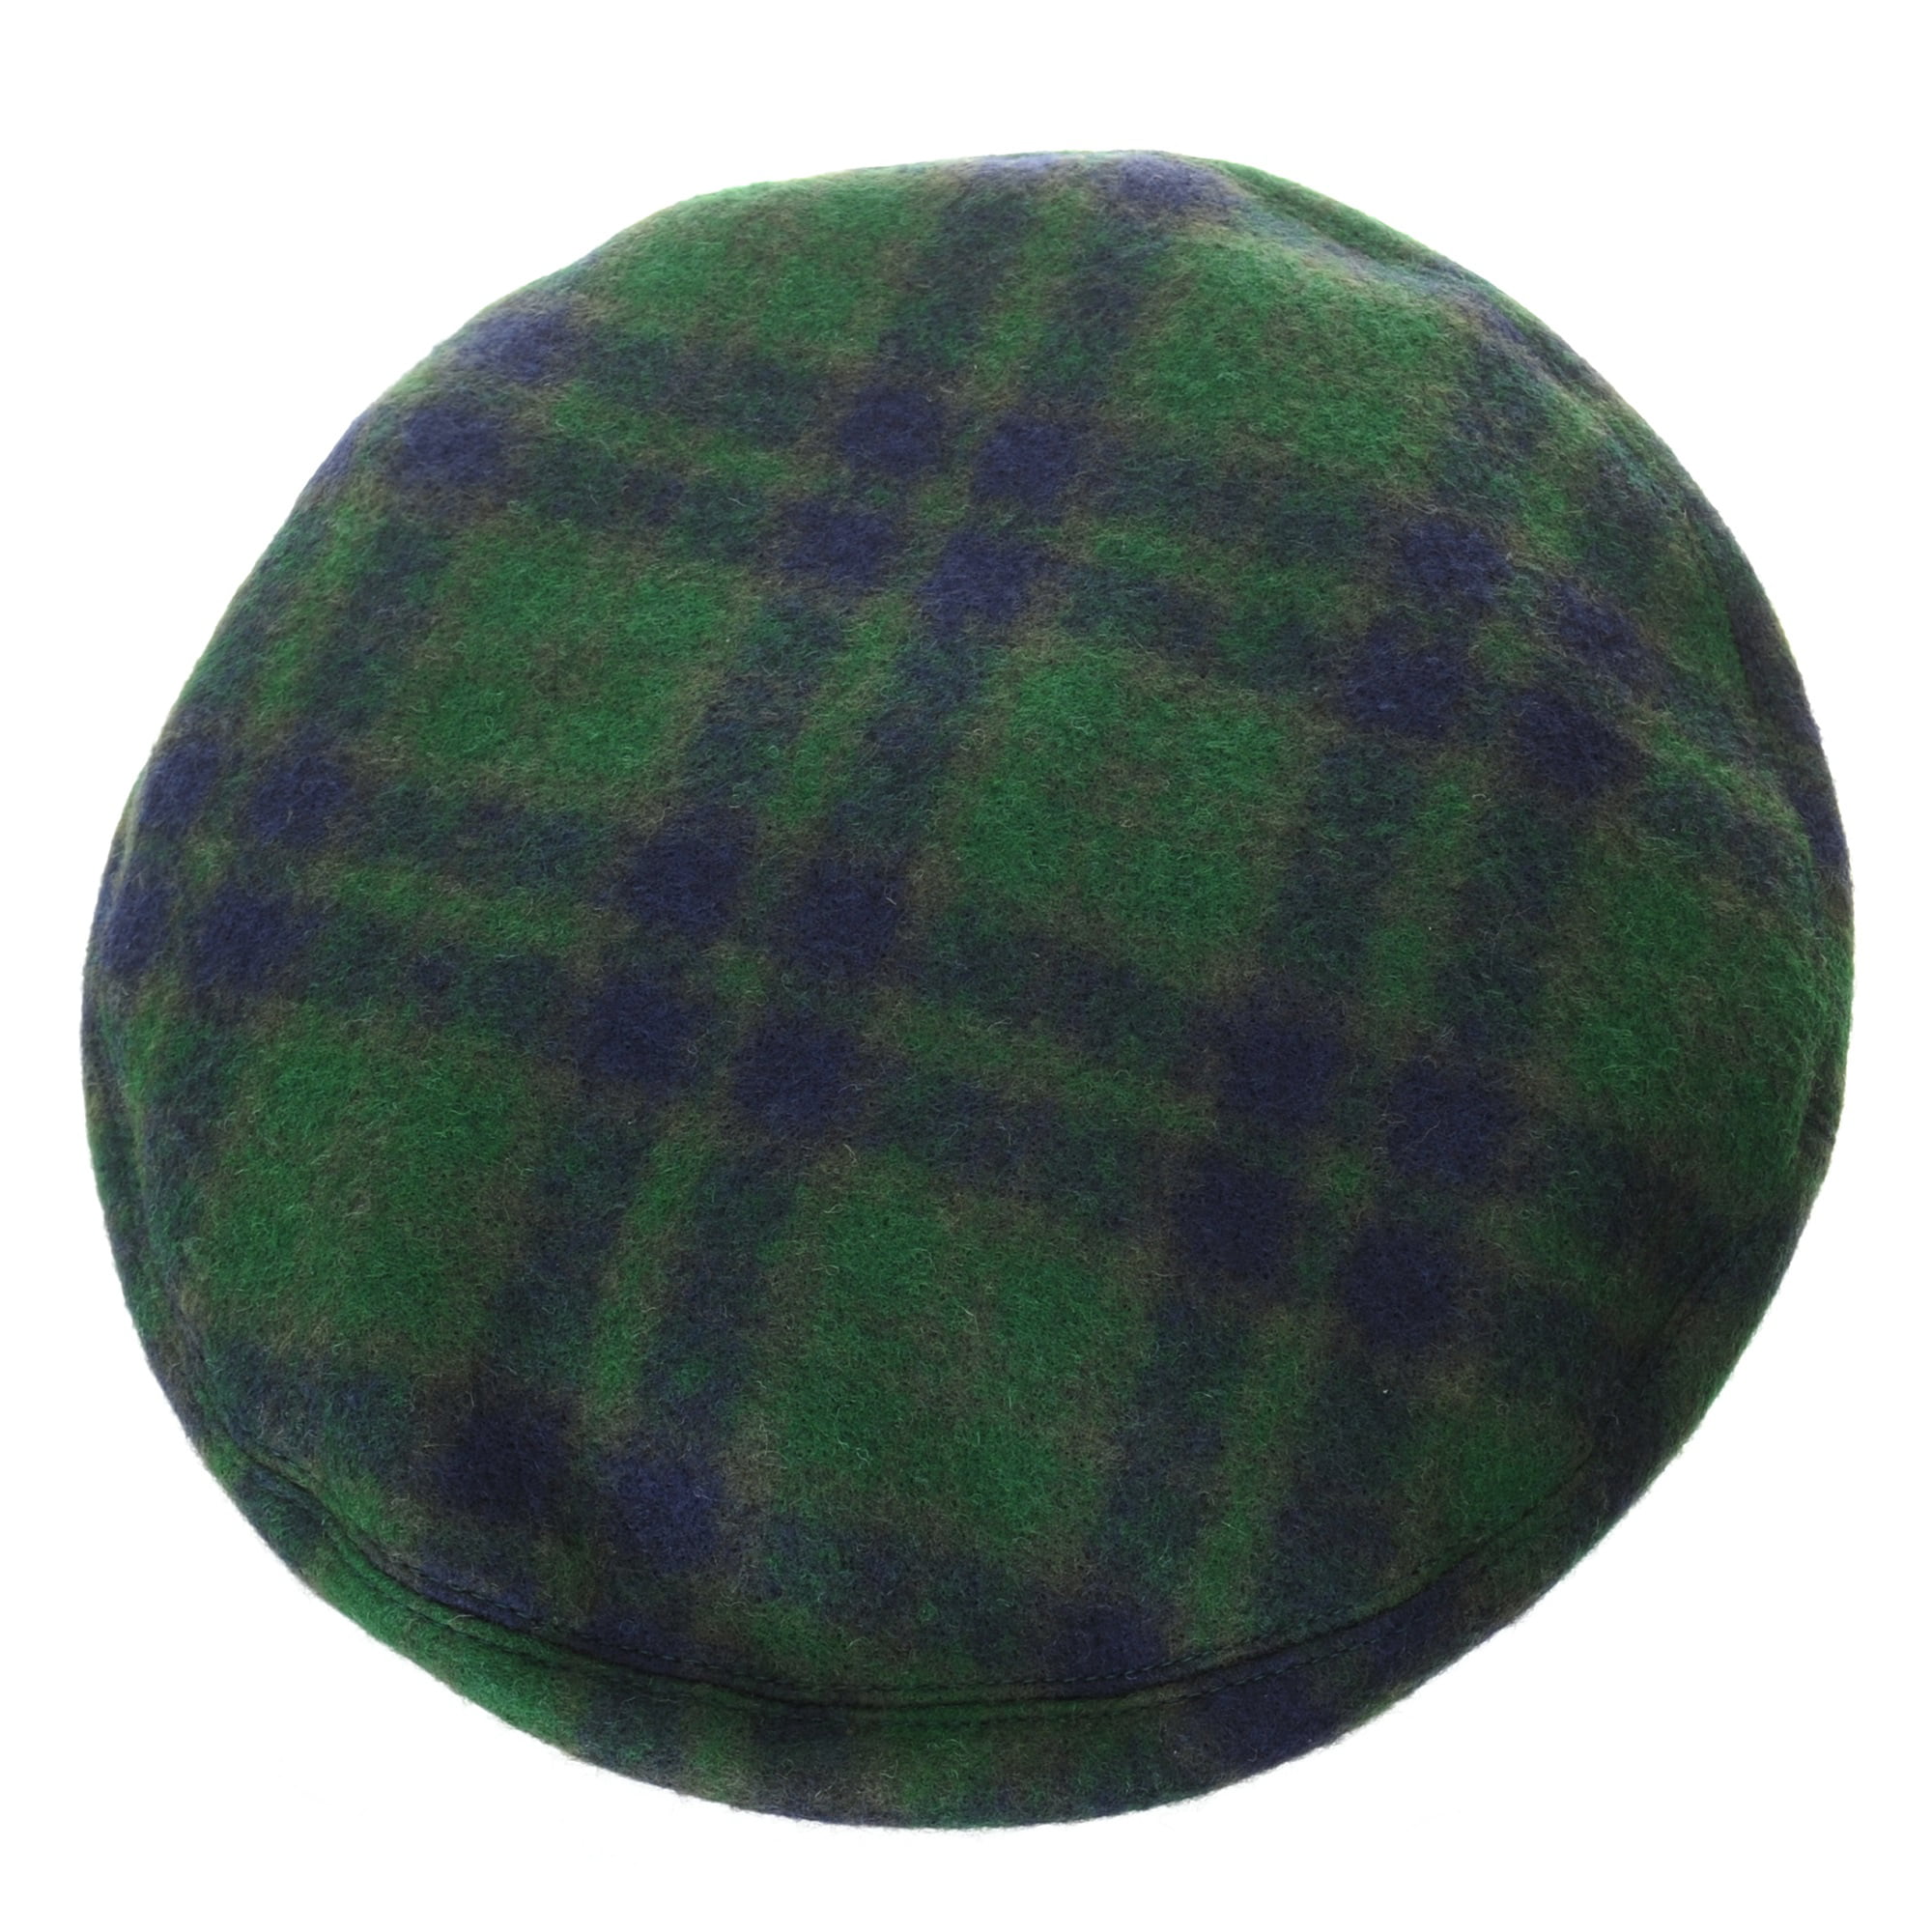 WITHMOONS Wool Beret Hat Tartan Check Leather Sweatband KR3781 